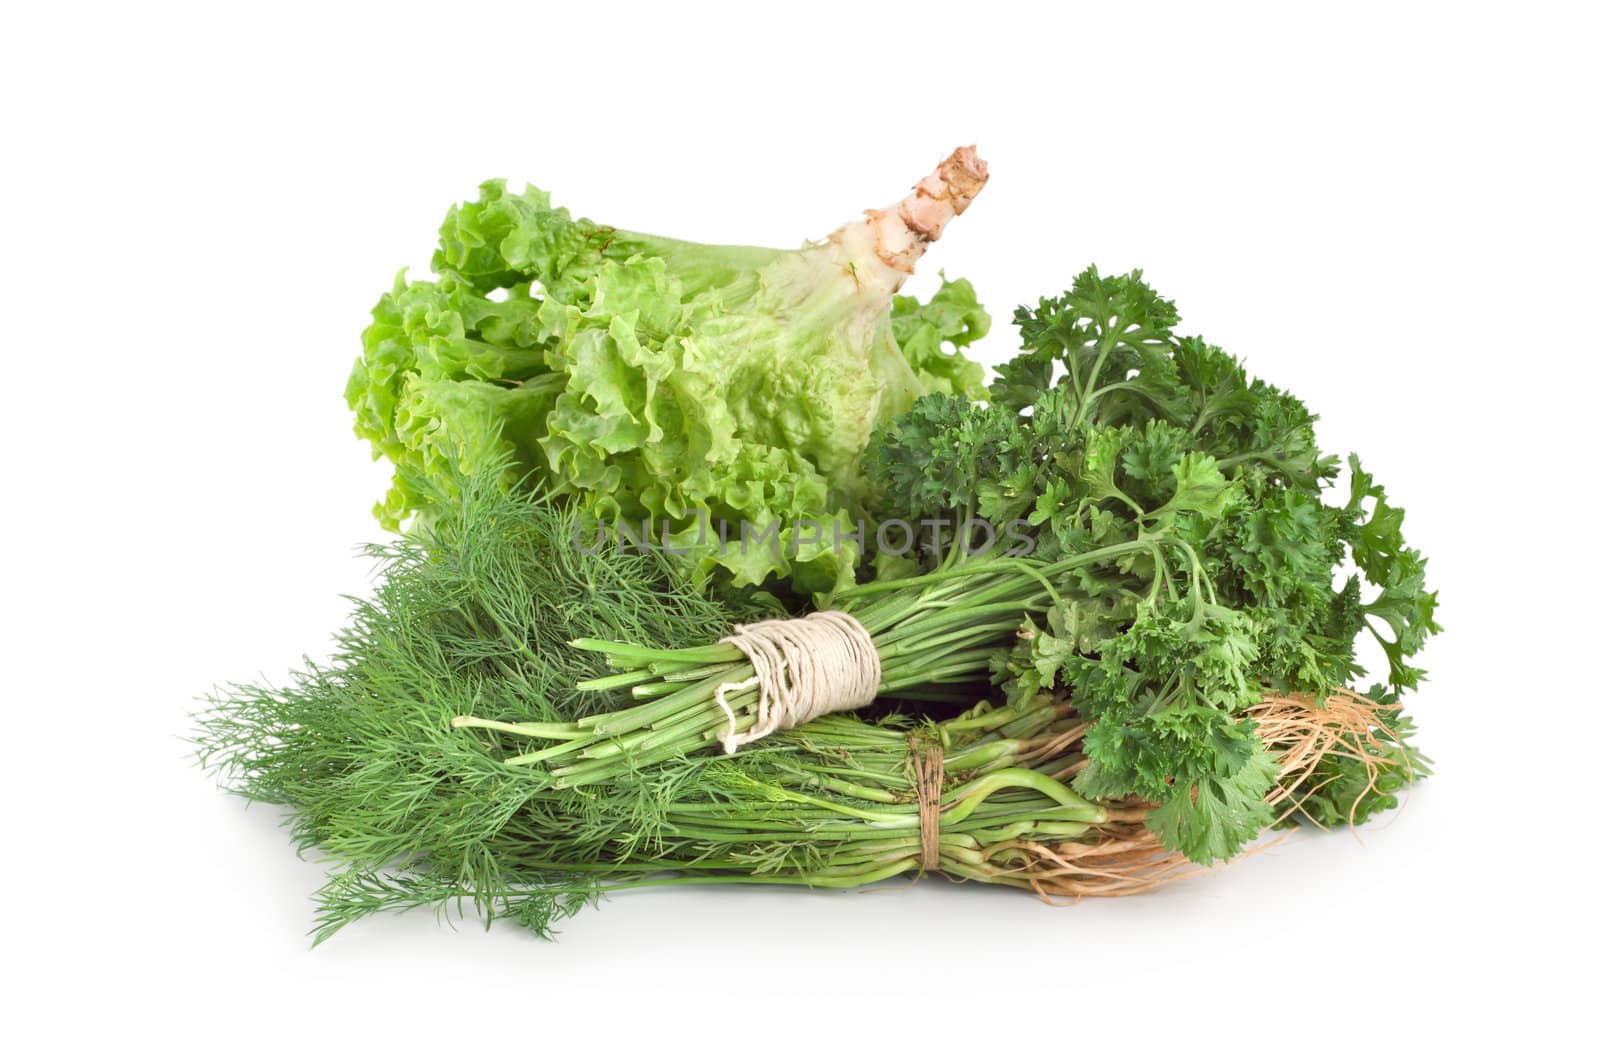 Parsley and other green by Givaga